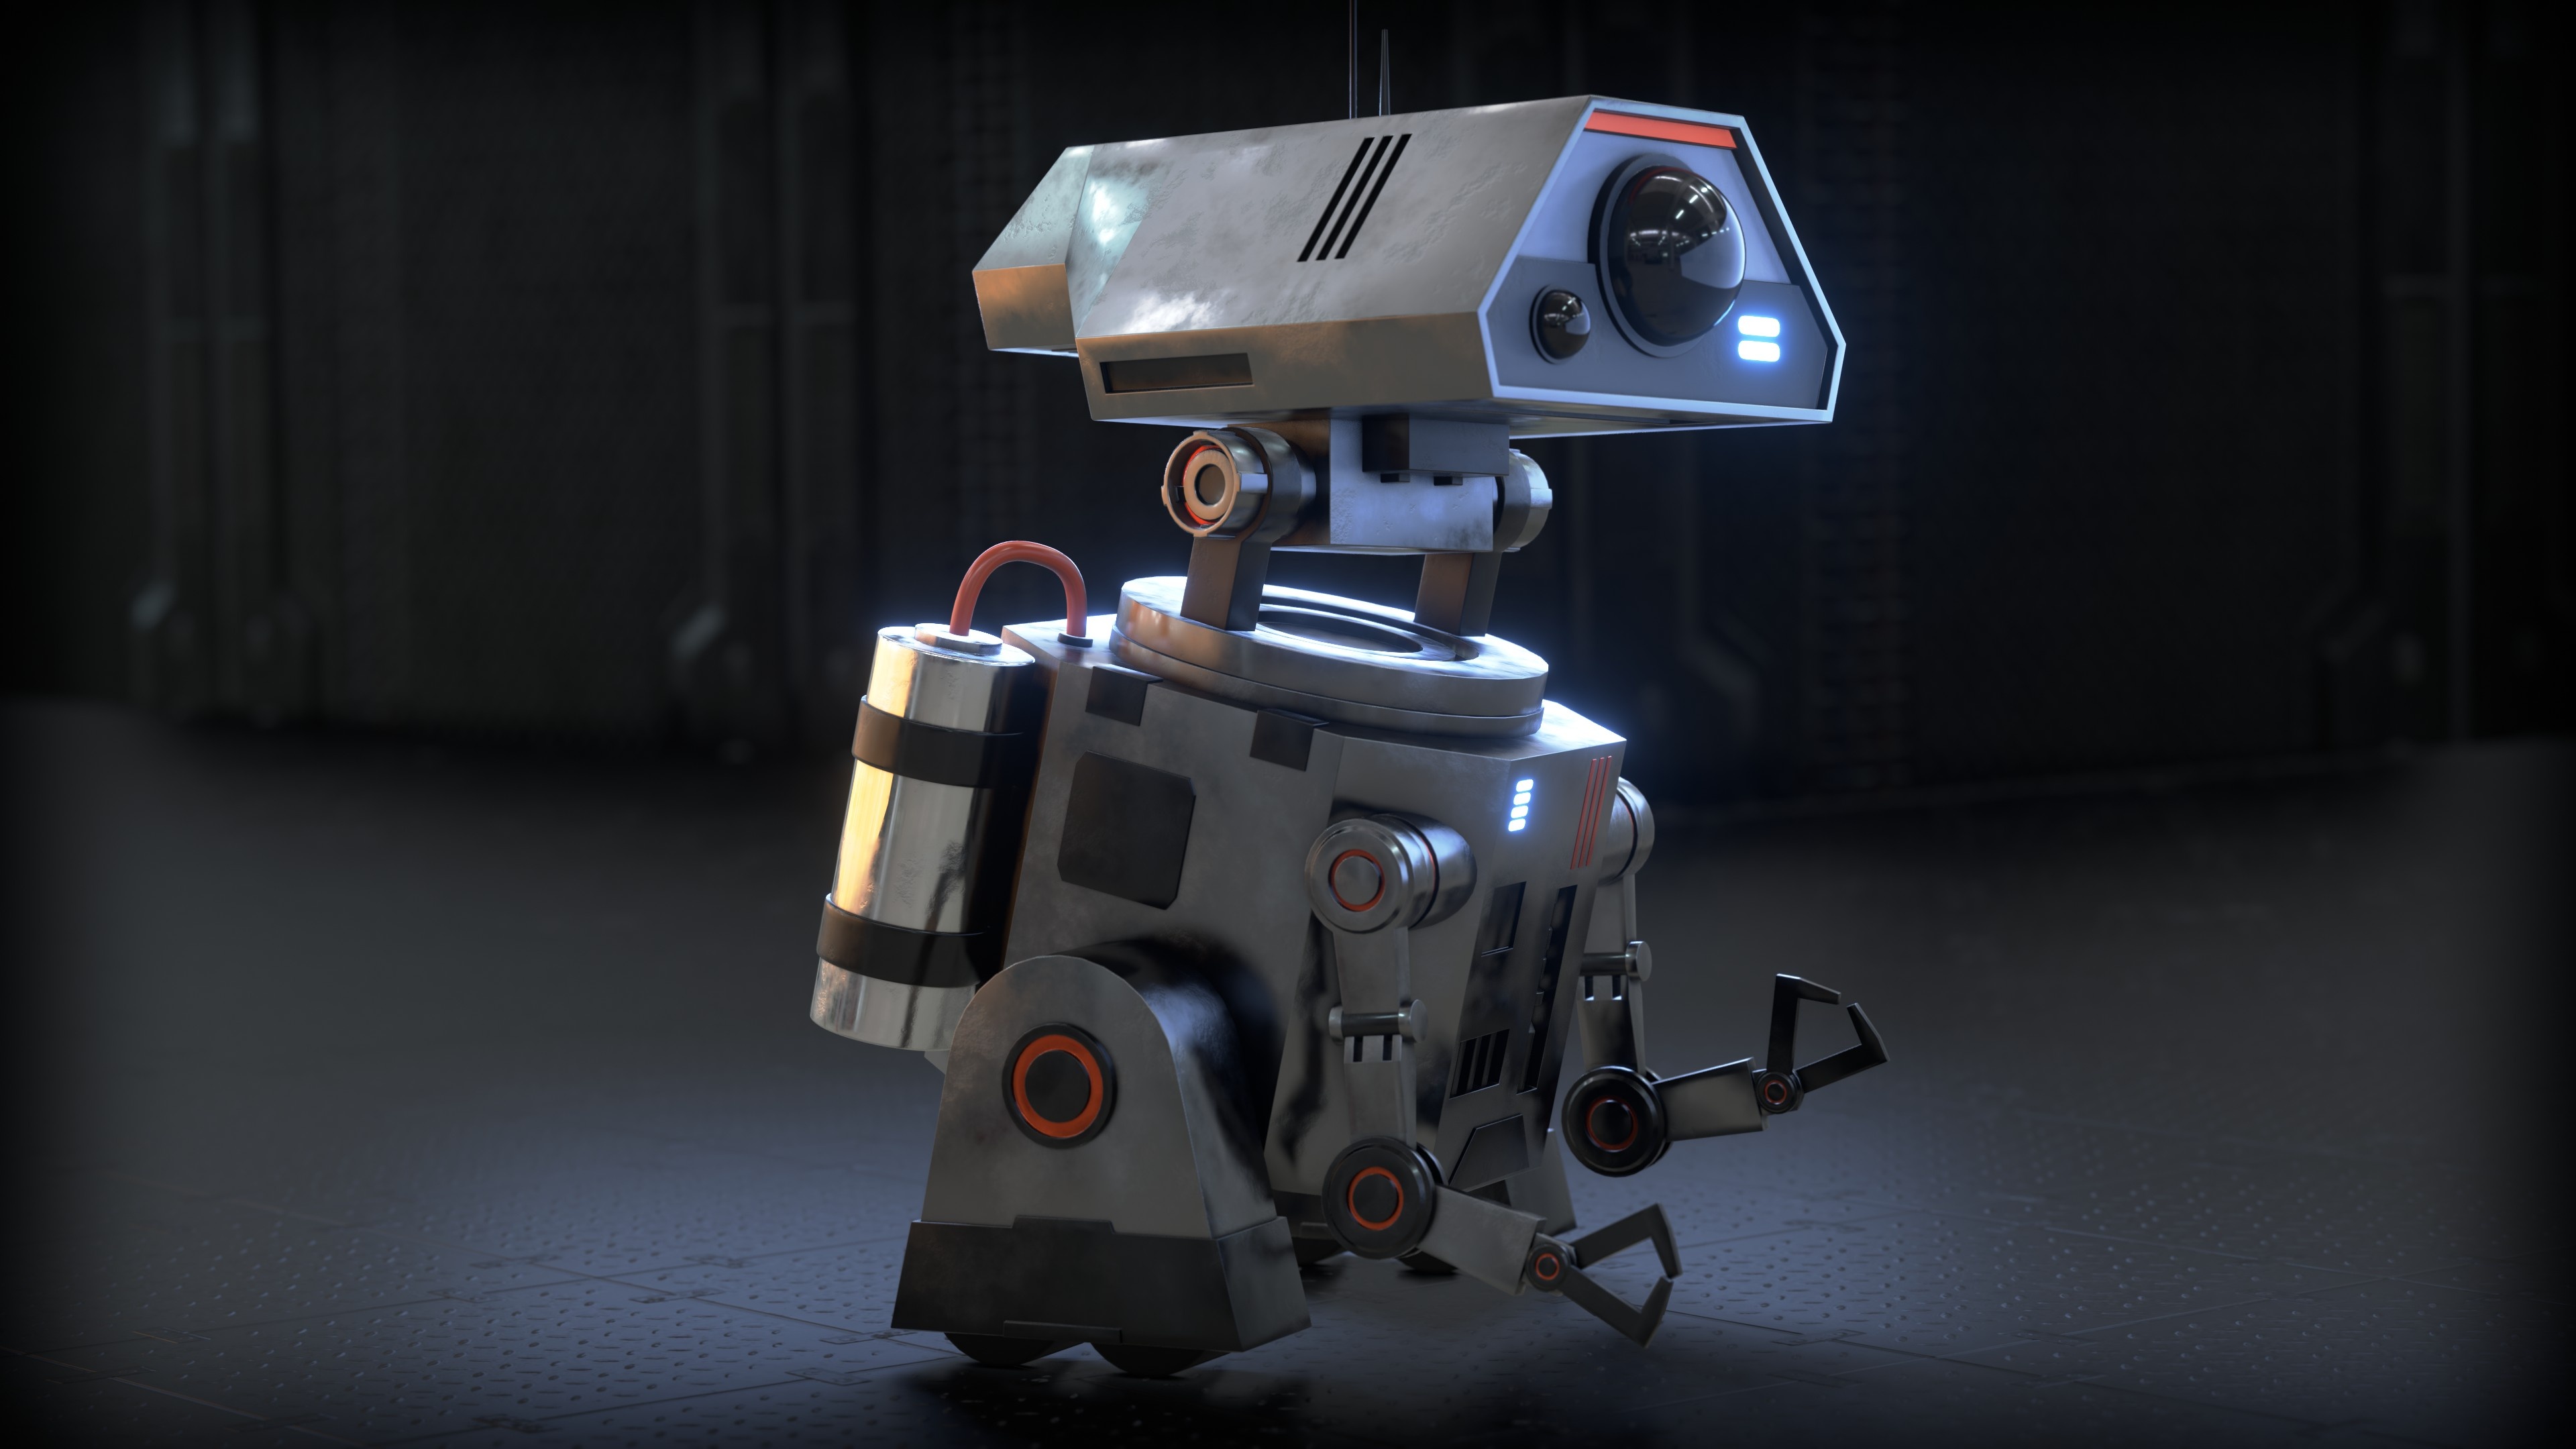 Robot: Sci-Fi worker bot, Carrying out a complex series of actions automatically. 3840x2160 4K Wallpaper.